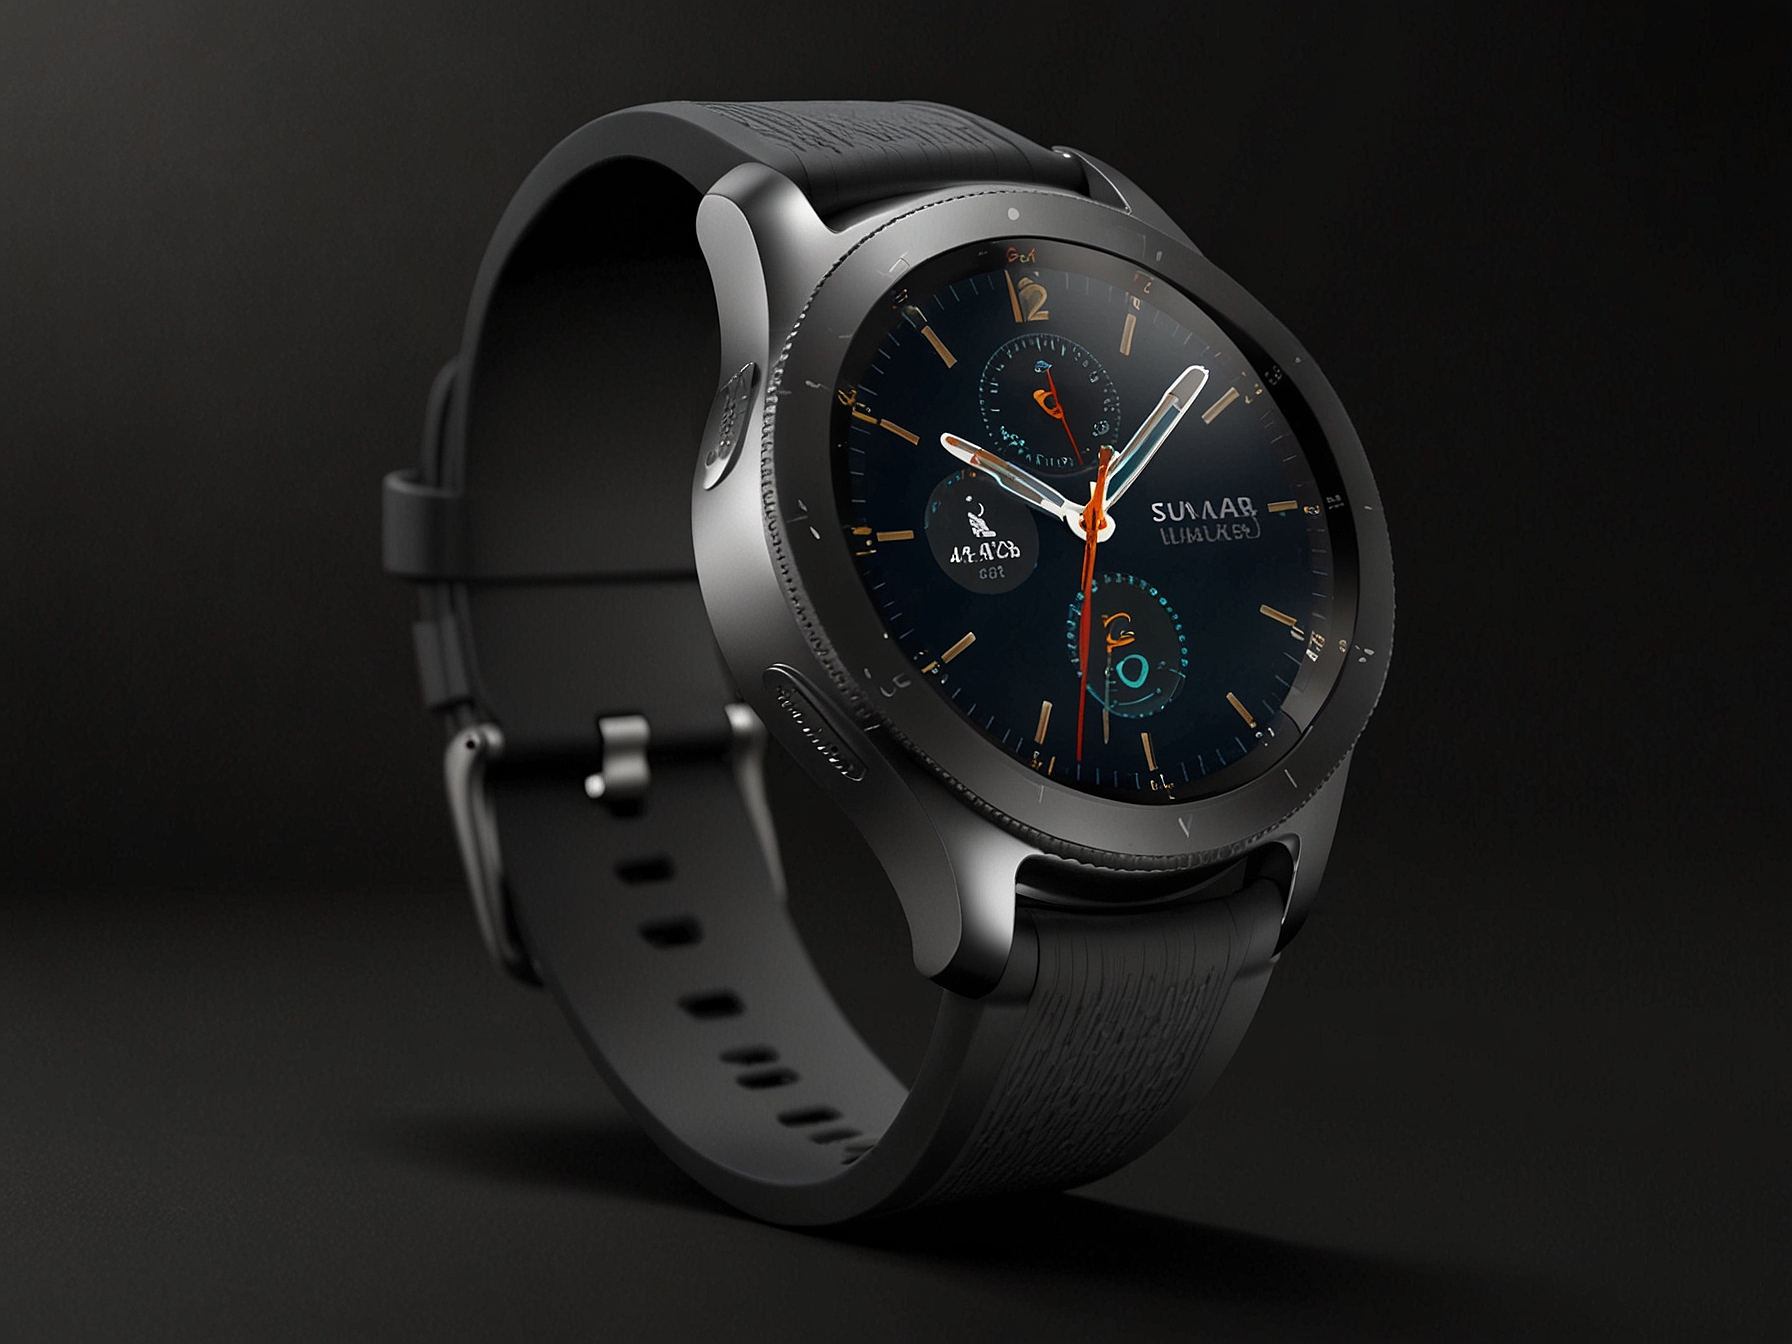 Render of Samsung Galaxy Watch Ultra showcasing its sleek design, larger display, and robust materials like titanium, underscoring its advanced health tracking and durability features.